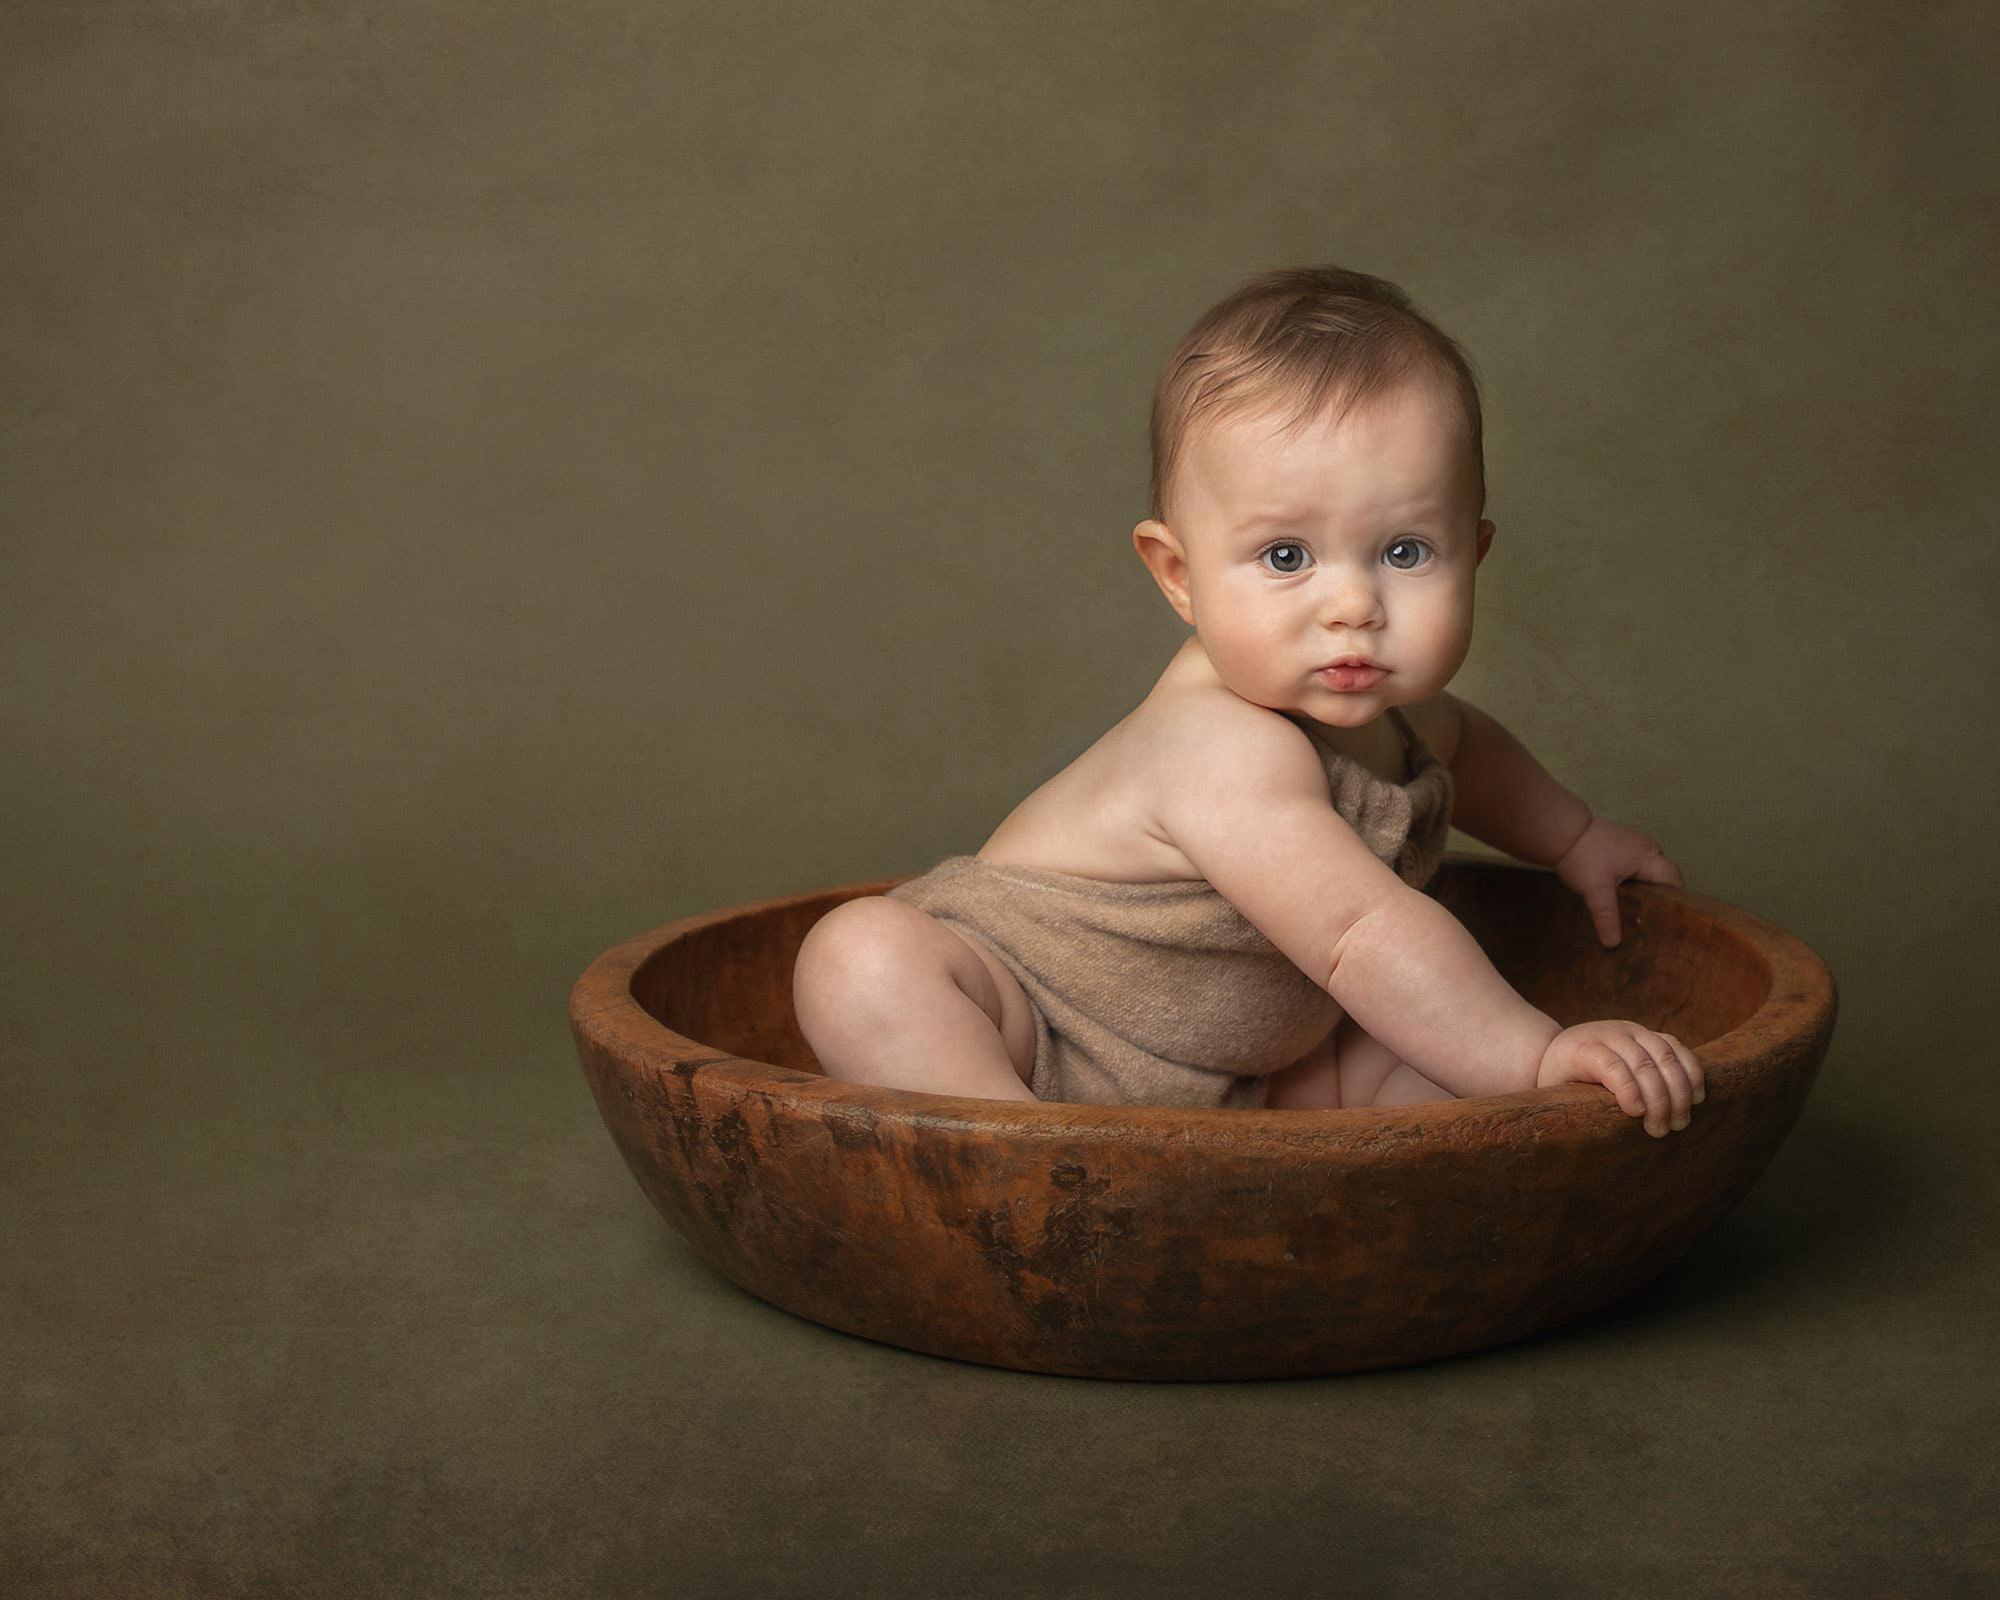 Baby in wooden bowl on green backdrop. Image taken in Glasgow at baby Photographer studio